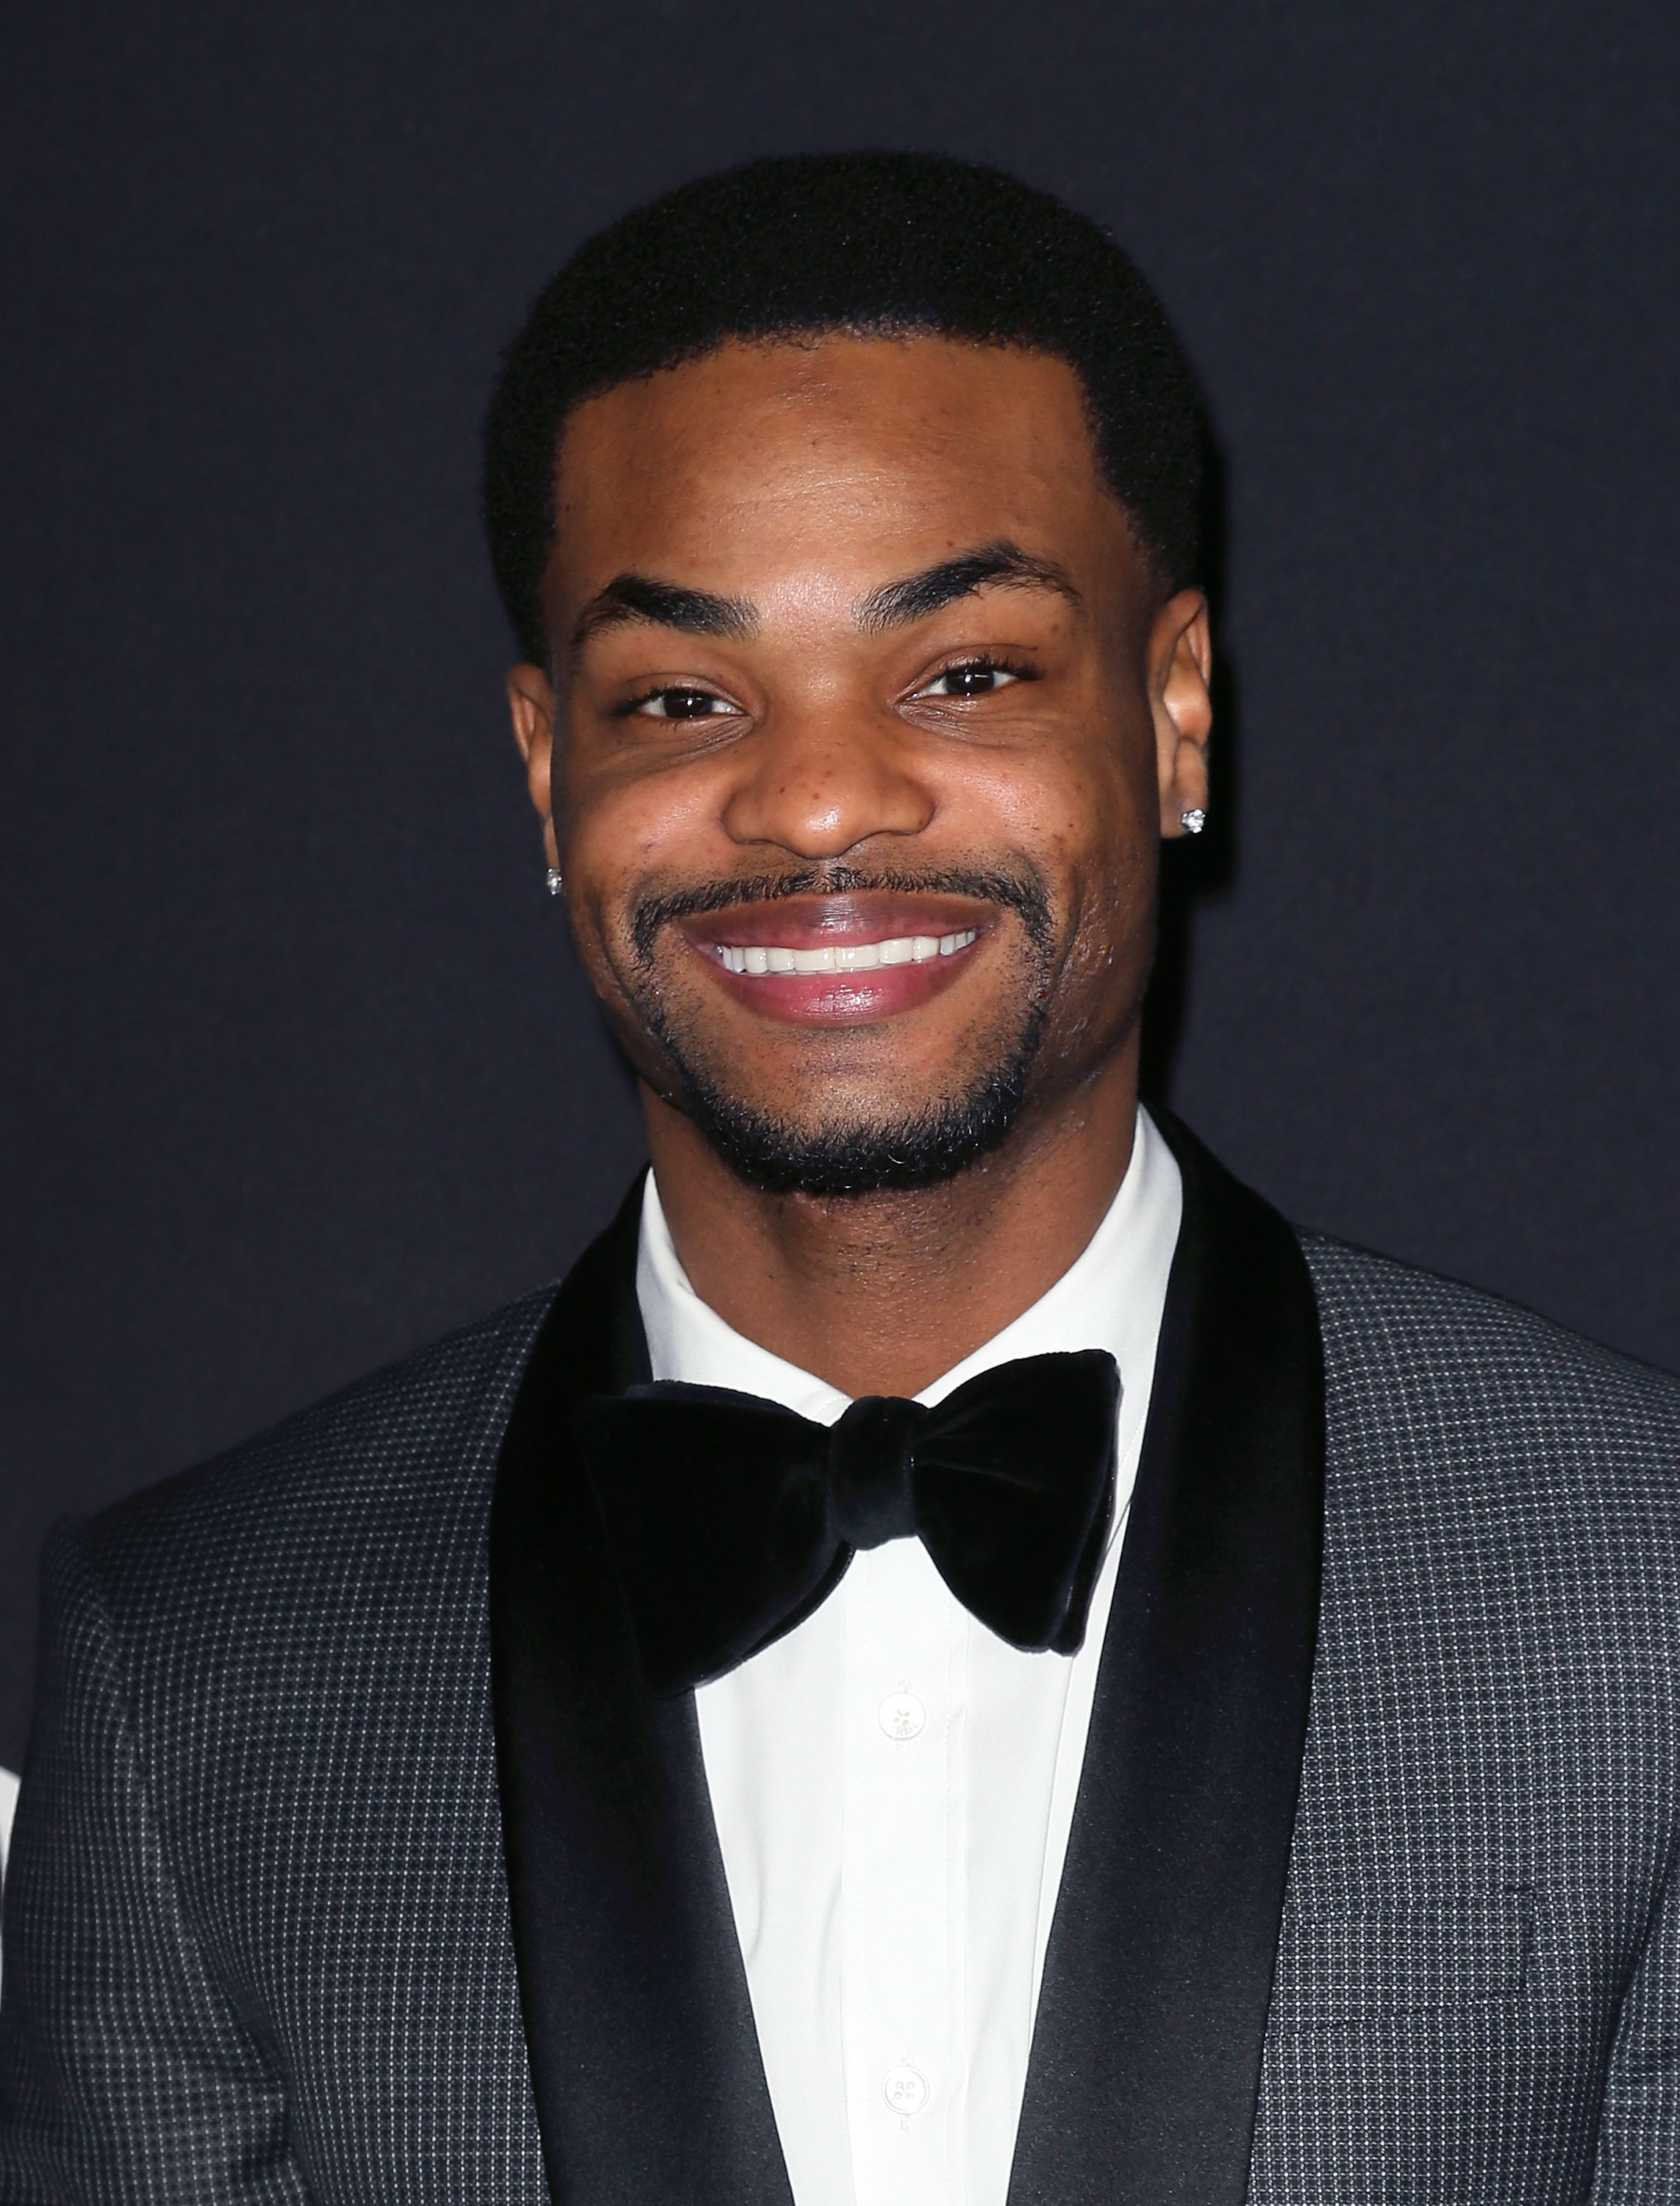 King Bach attends the premiere of "Fifty Shades of Black" on January 26, 2016 in Los Angeles, California.